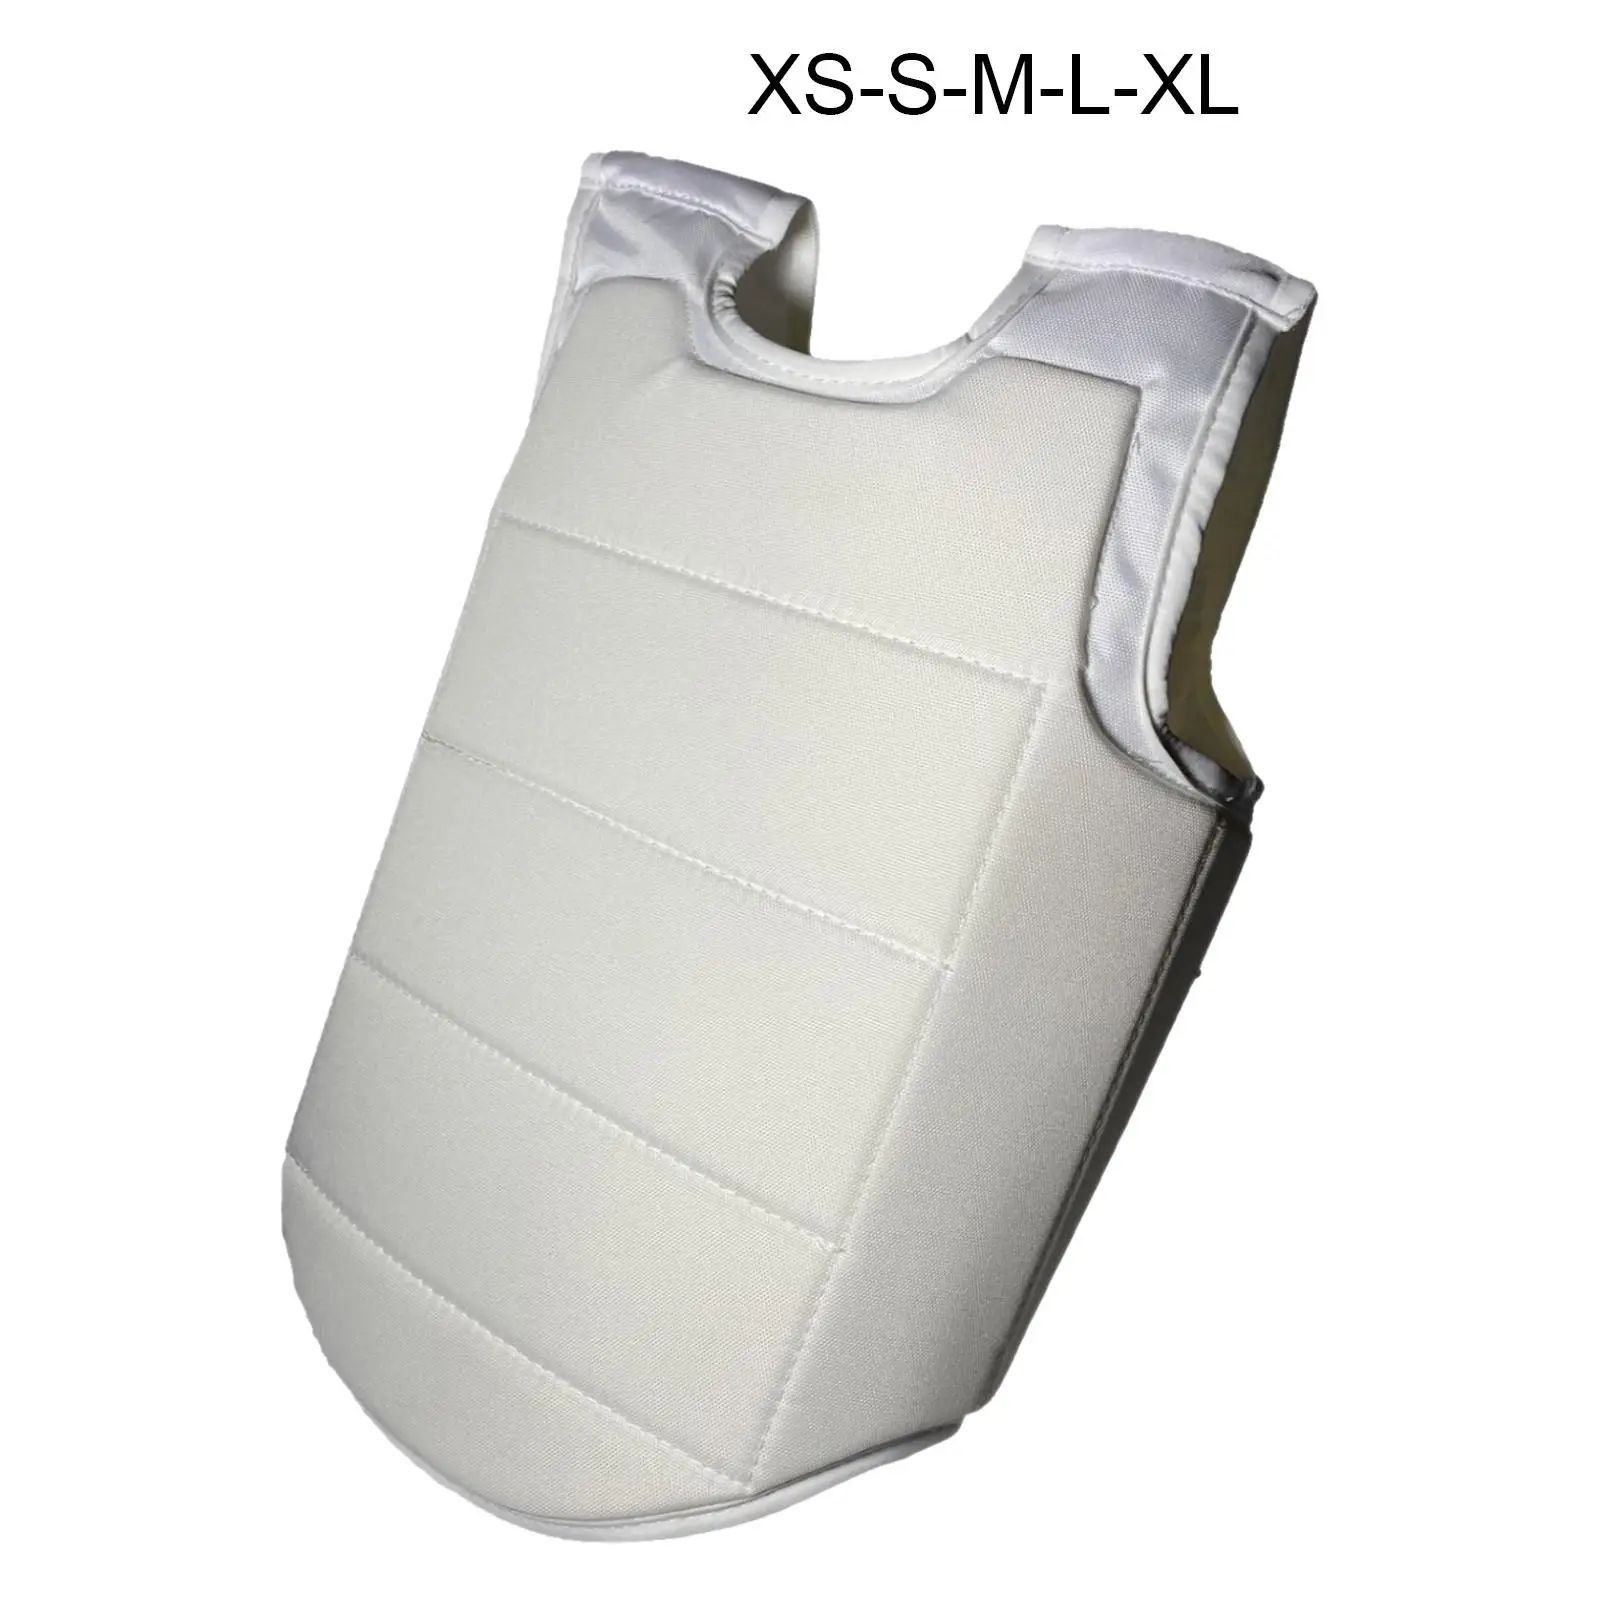 Karate Chest Protector Chest Guard Muay Thai Rib Shield Vest Body Protection for Youth Adult Kids Training Boxing Martial Arts